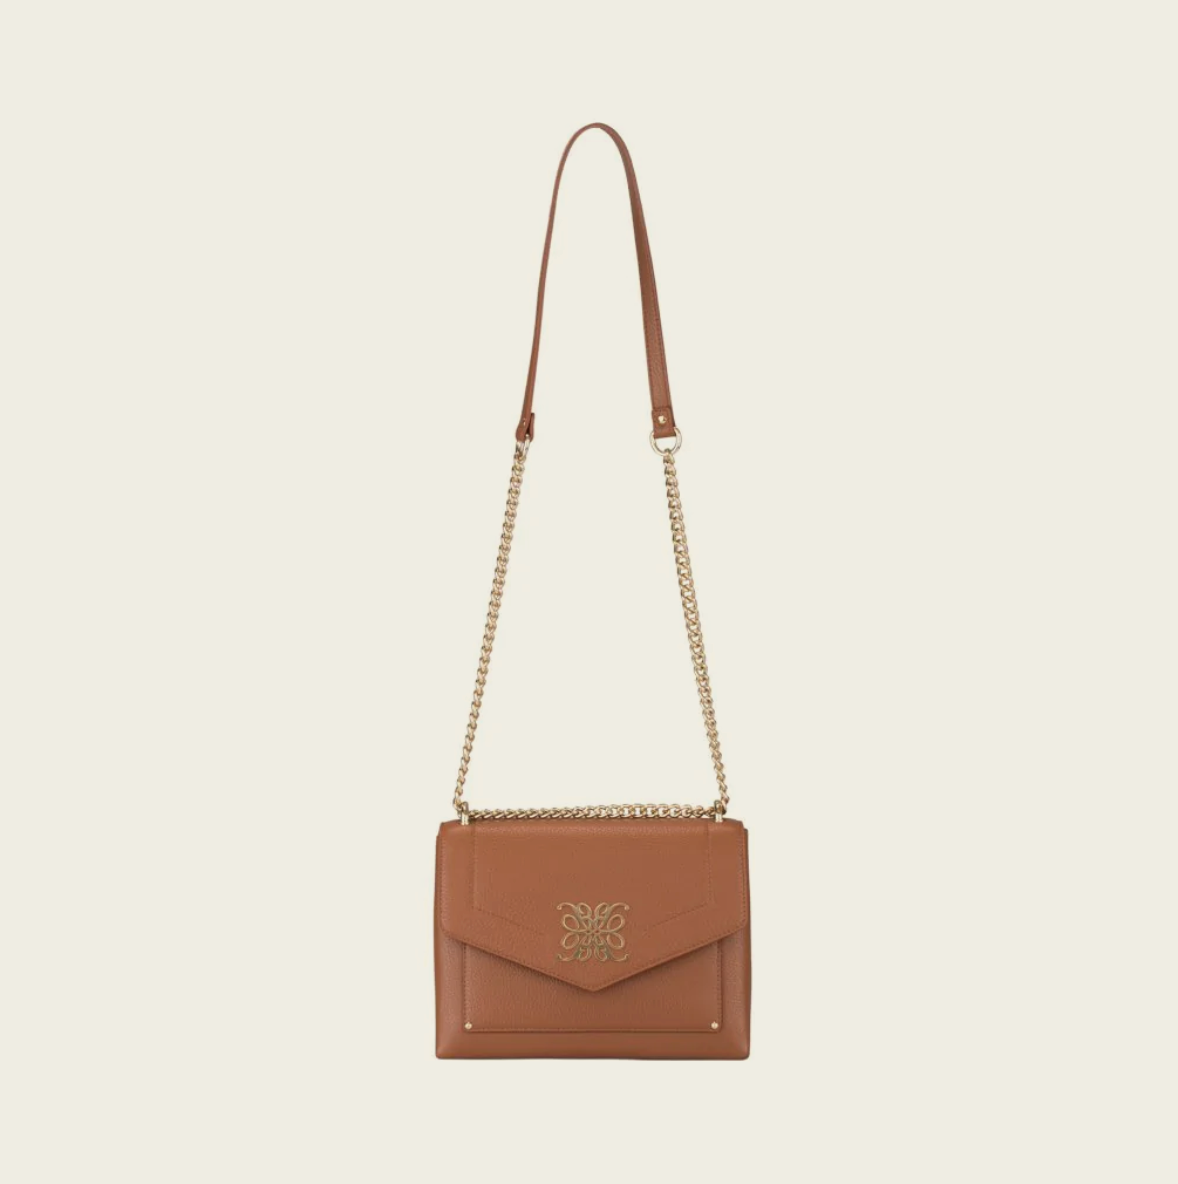 Italian handcrafted bag collections at Via Neapolis.